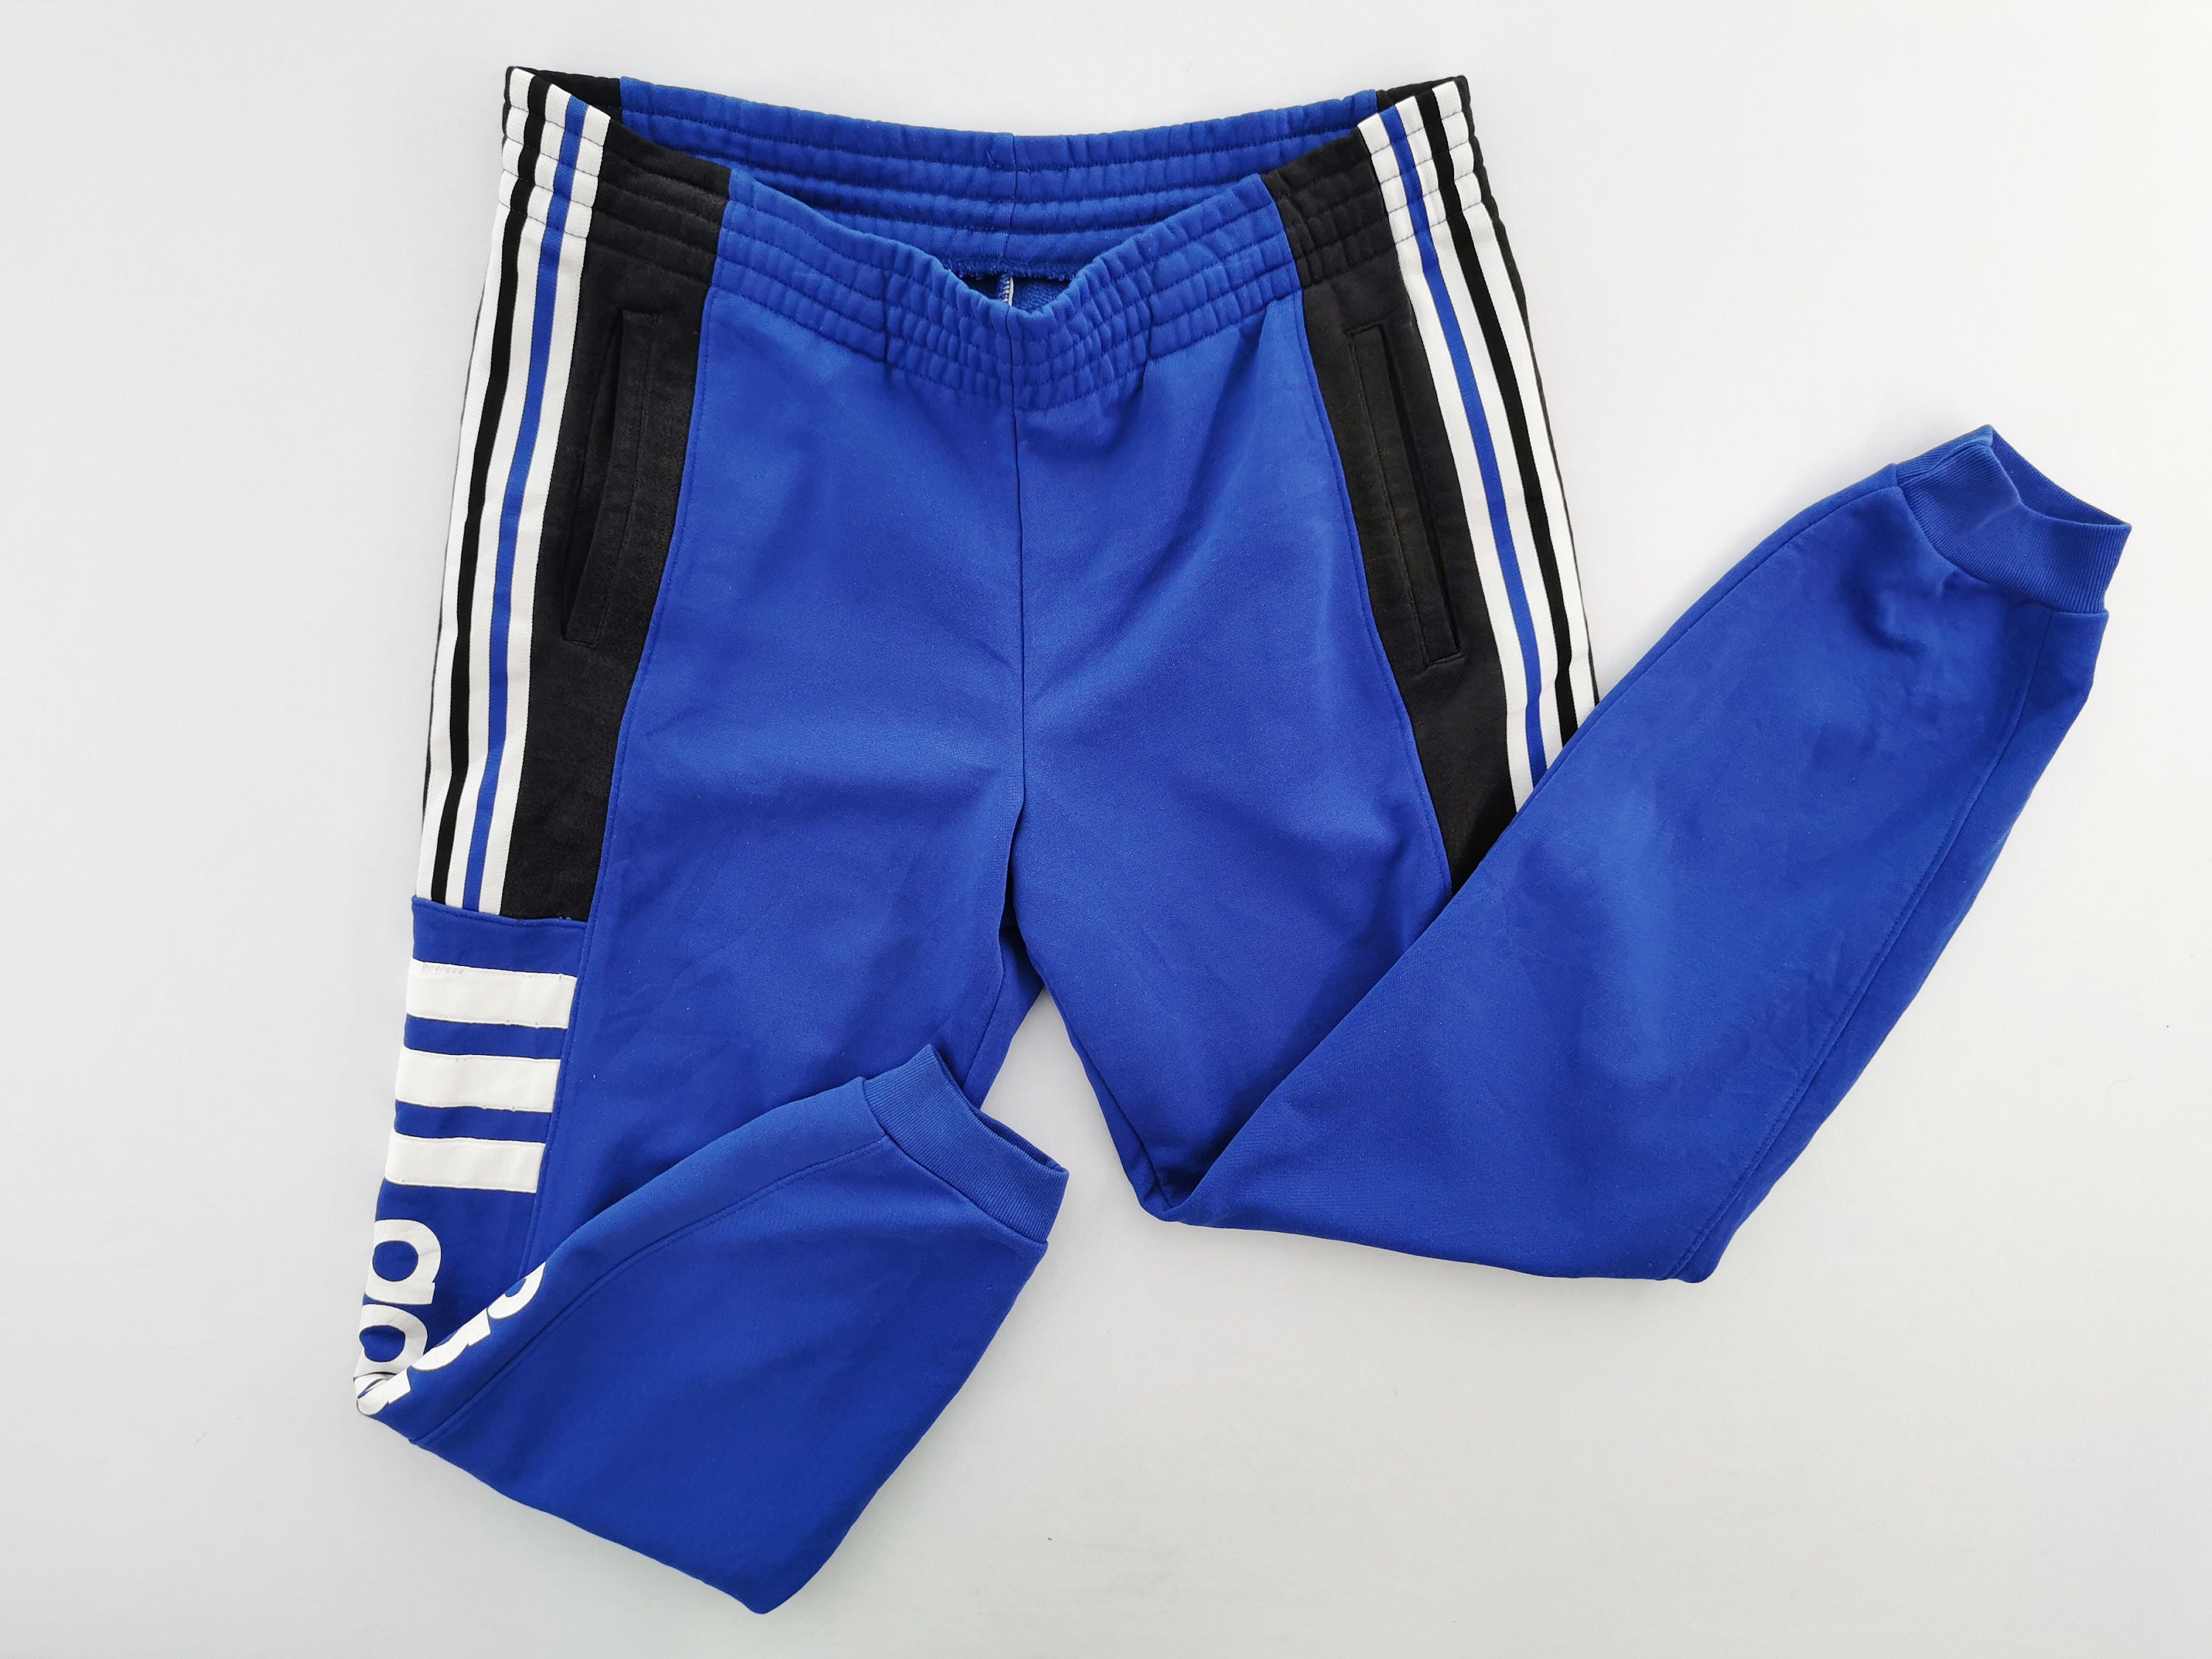 Adidas Pants for Men for sale in Los Angeles California  Facebook  Marketplace  Facebook